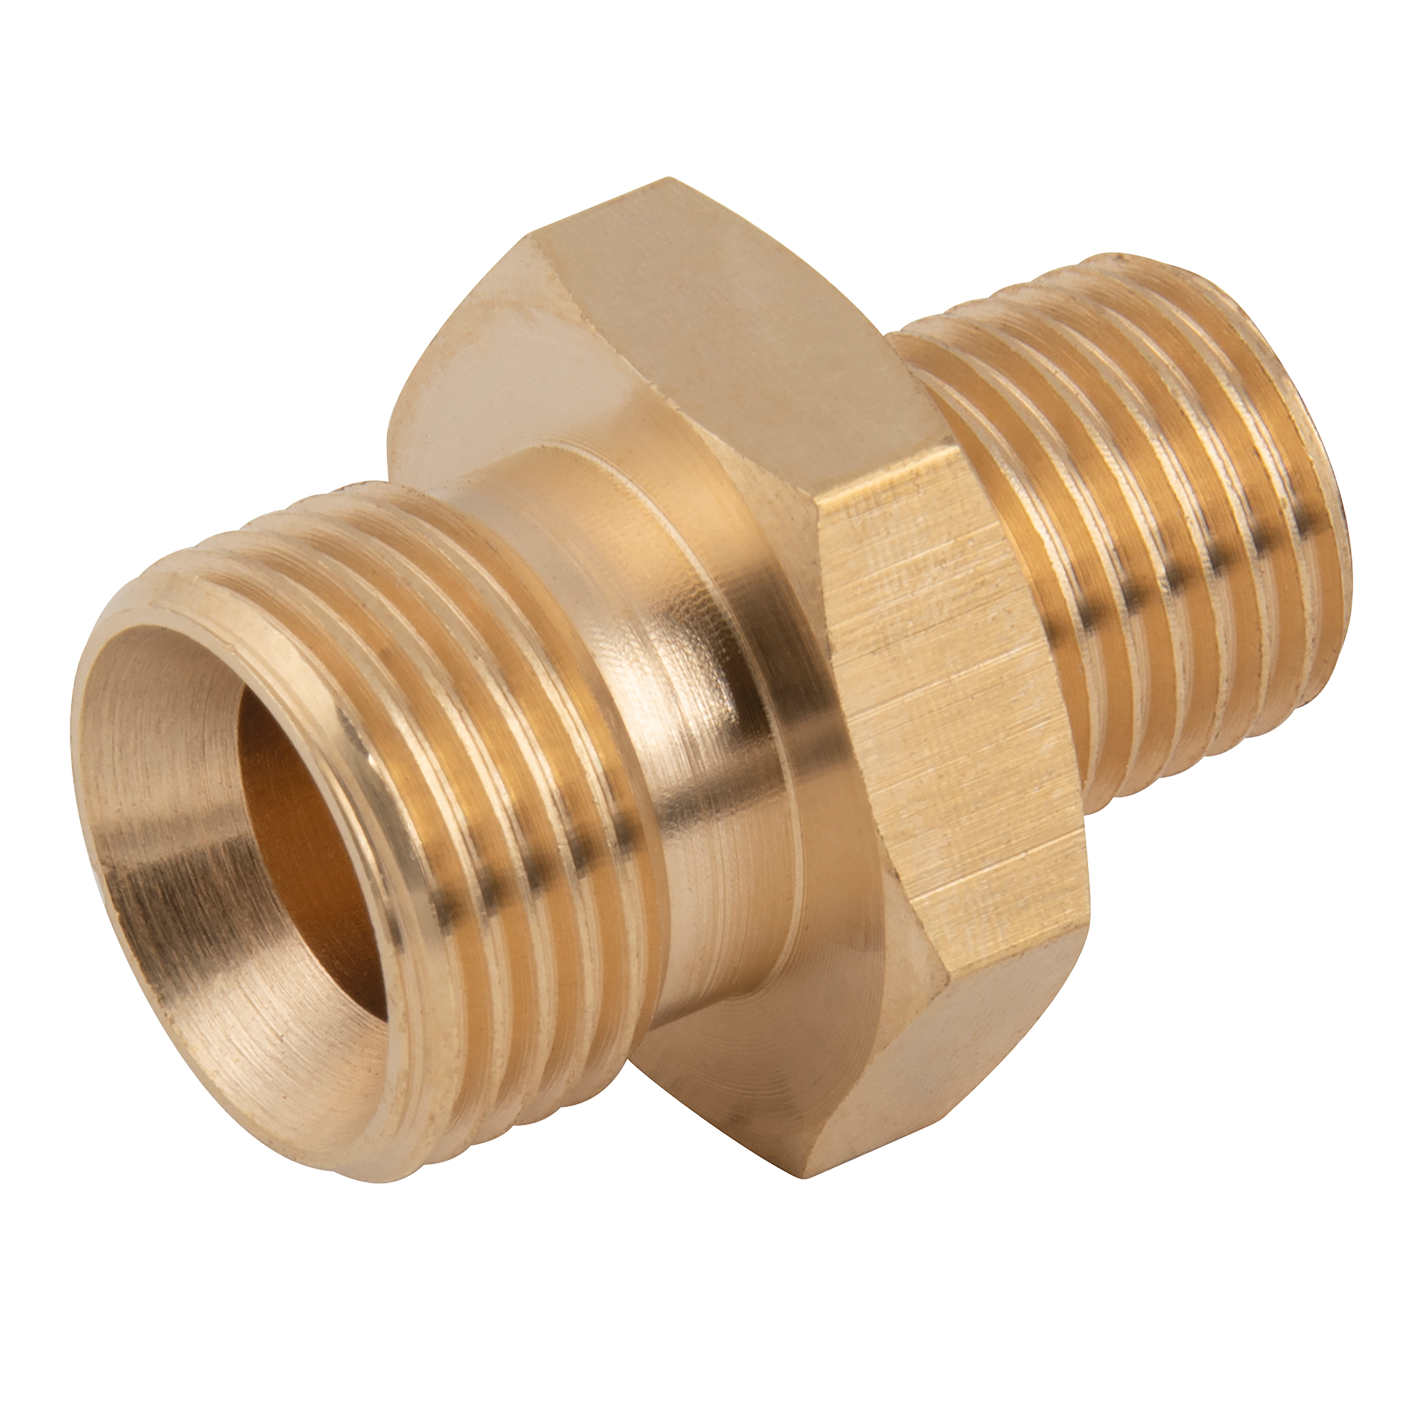 1/8" BSPP Male x 1/4" BSPT Male Unequal Adaptor